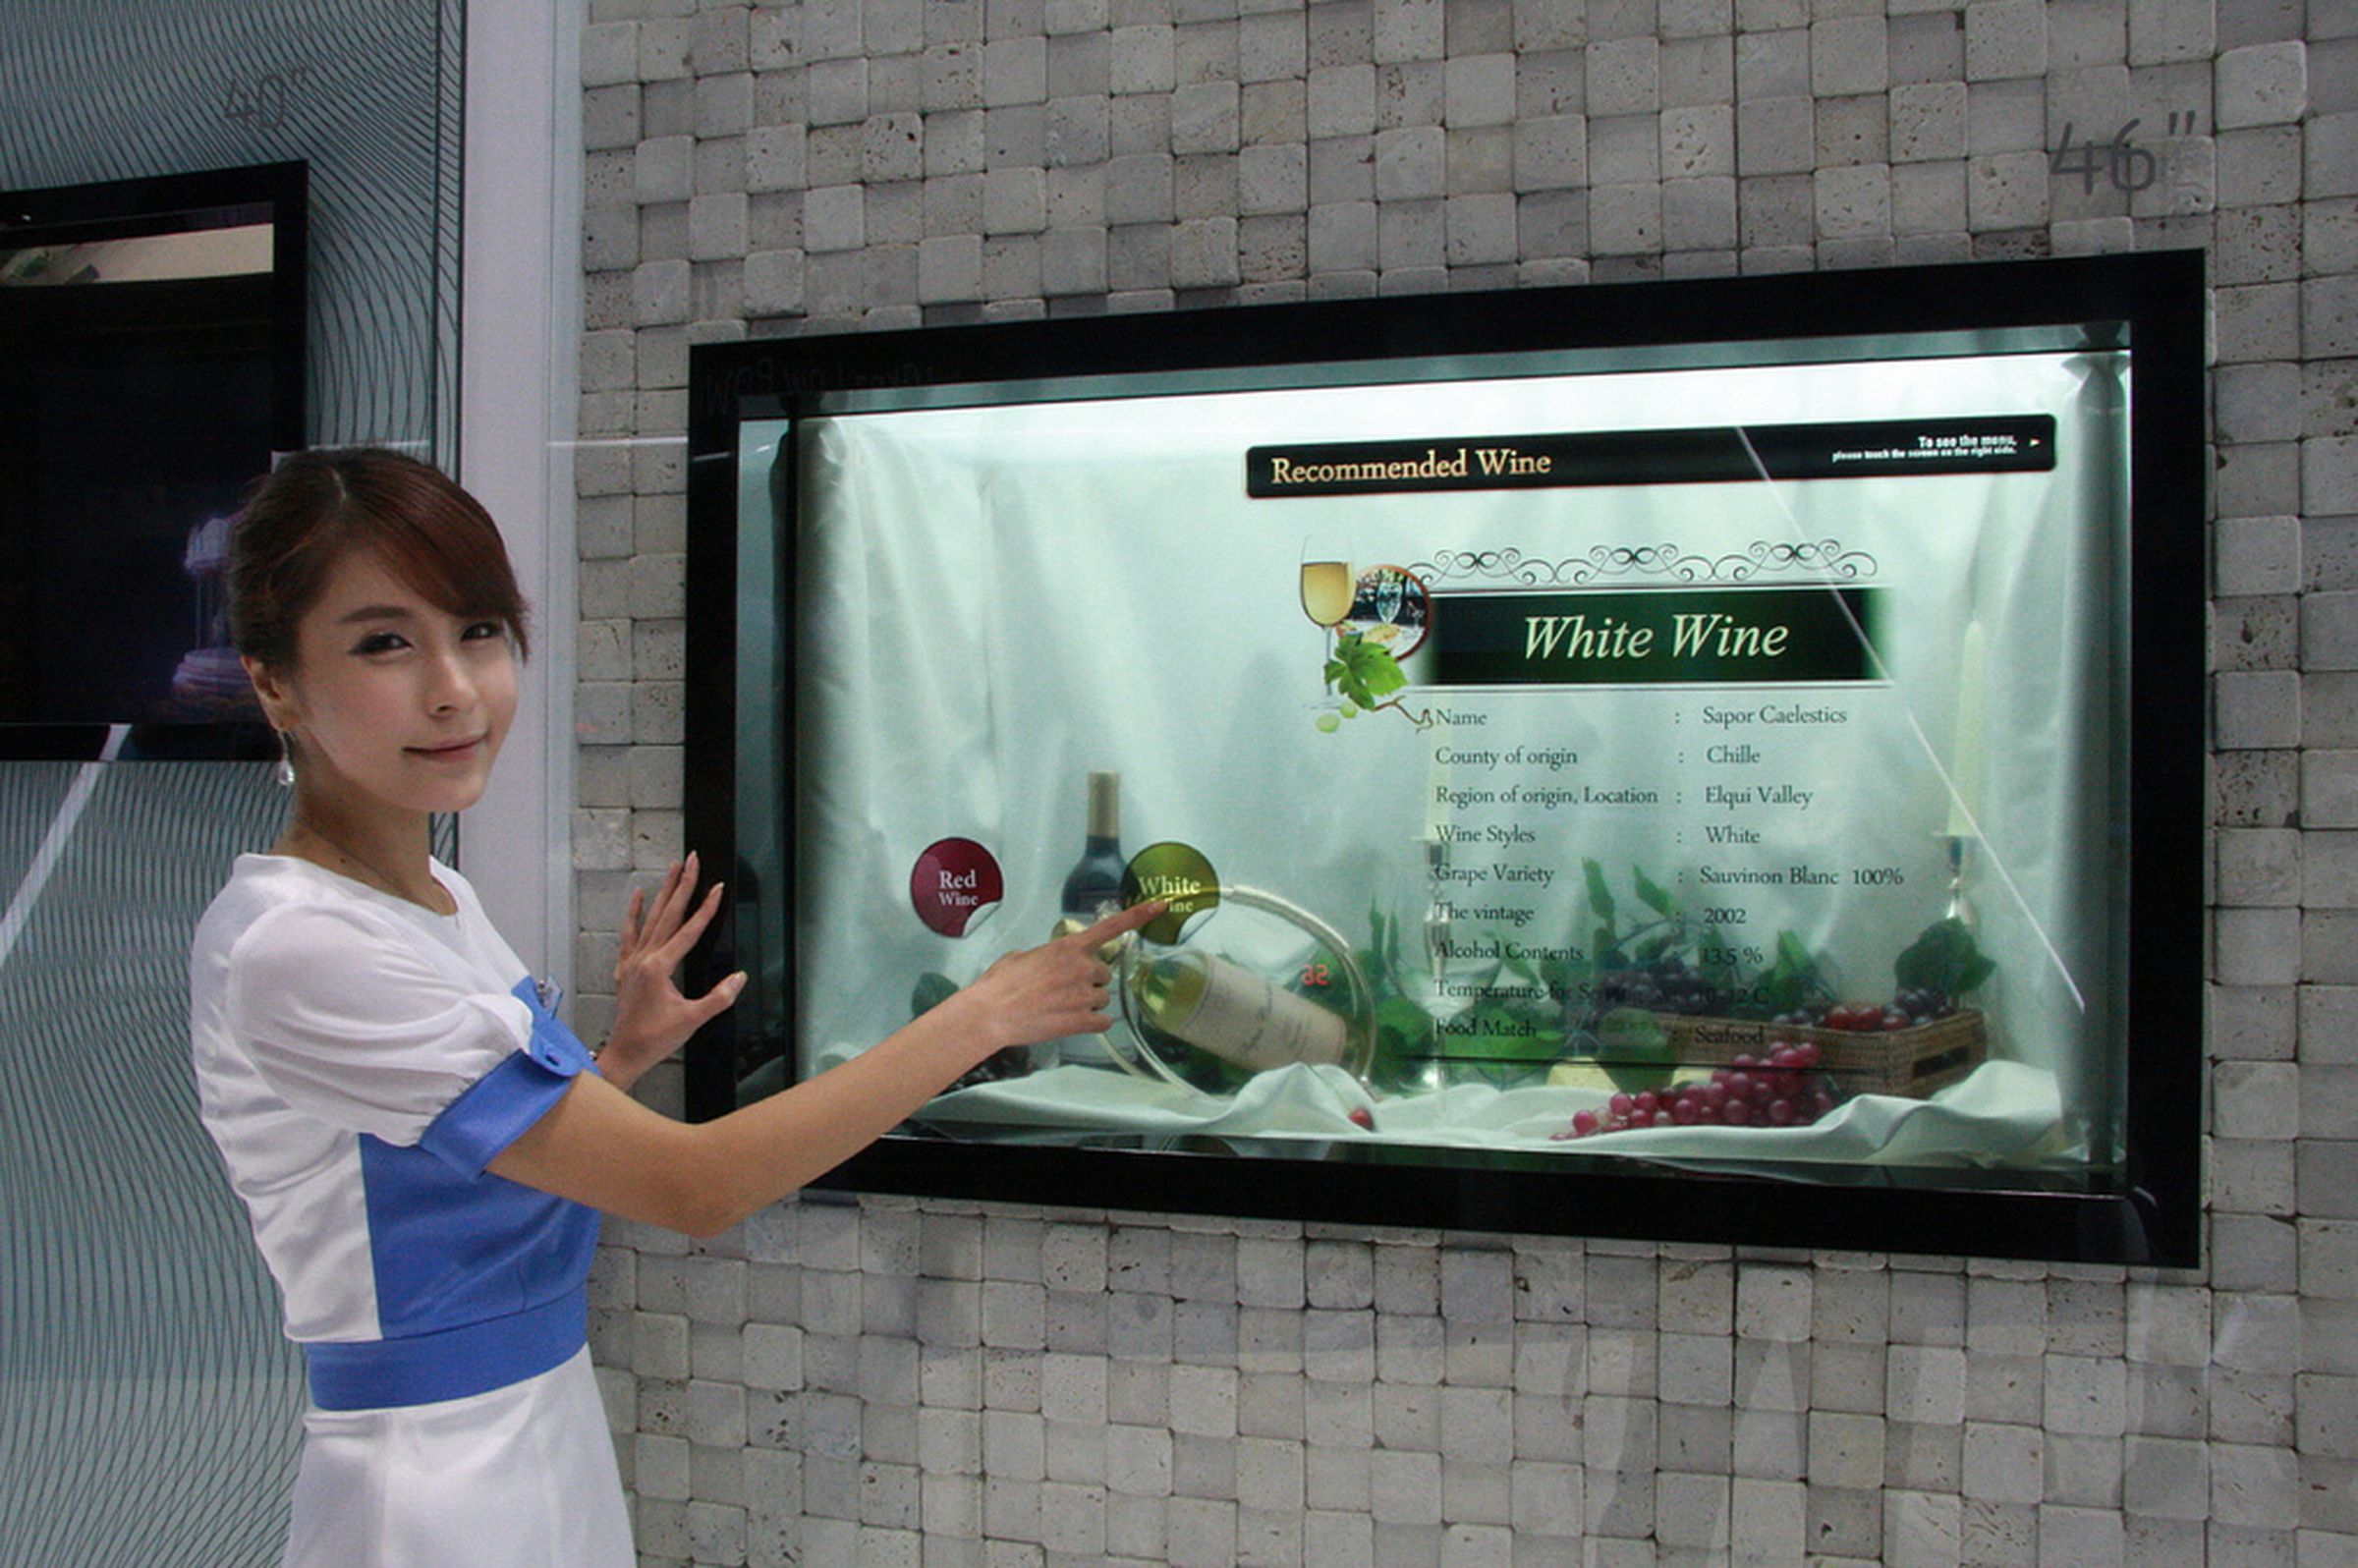 Samsung 46-inch transparent LCD gallery